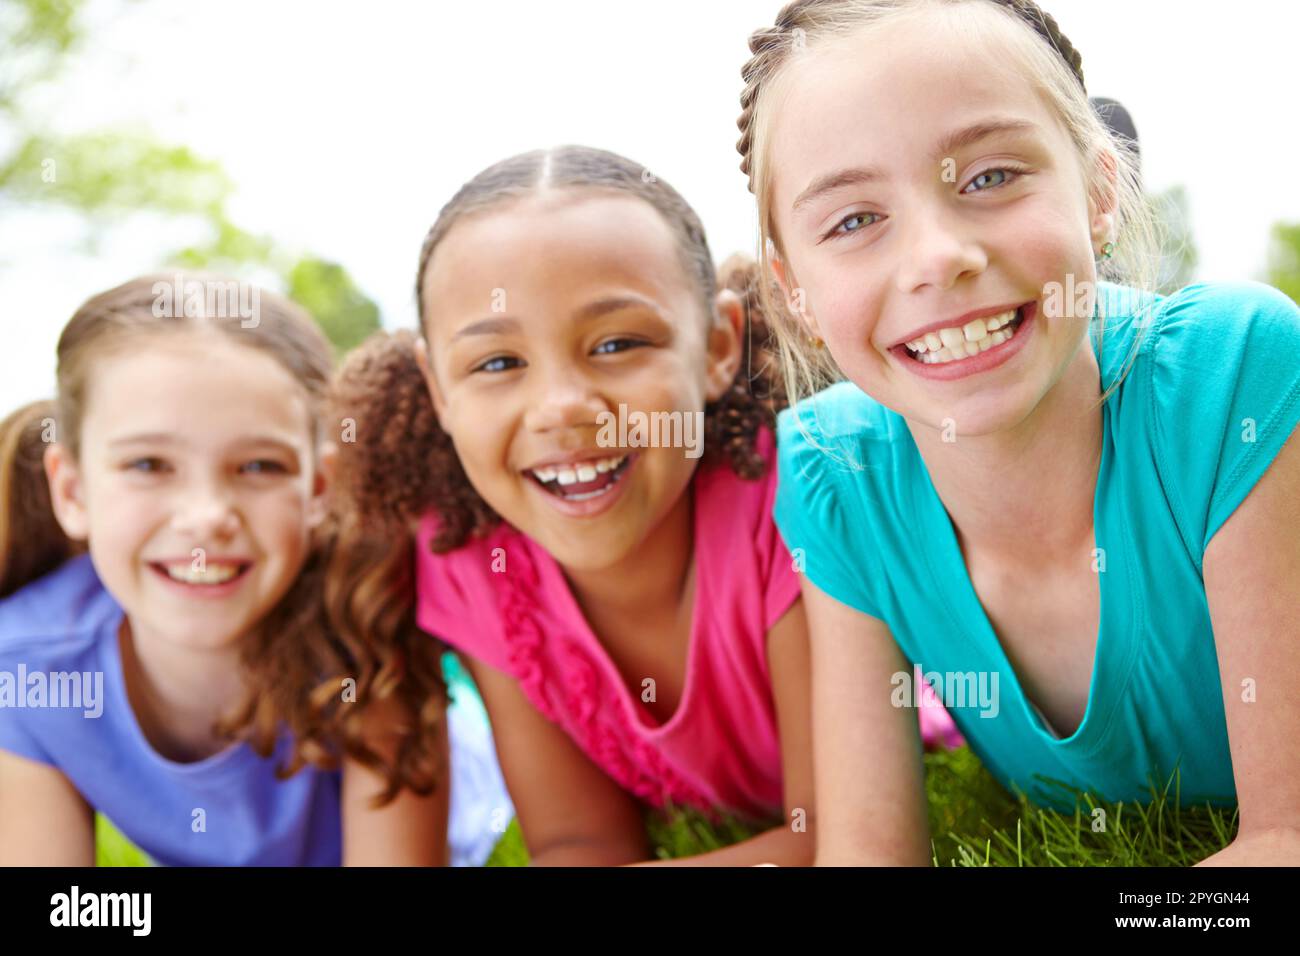 Having fun together. Three multi-ethnic young girls lying on the grass in a park smiling at the camera. Stock Photo